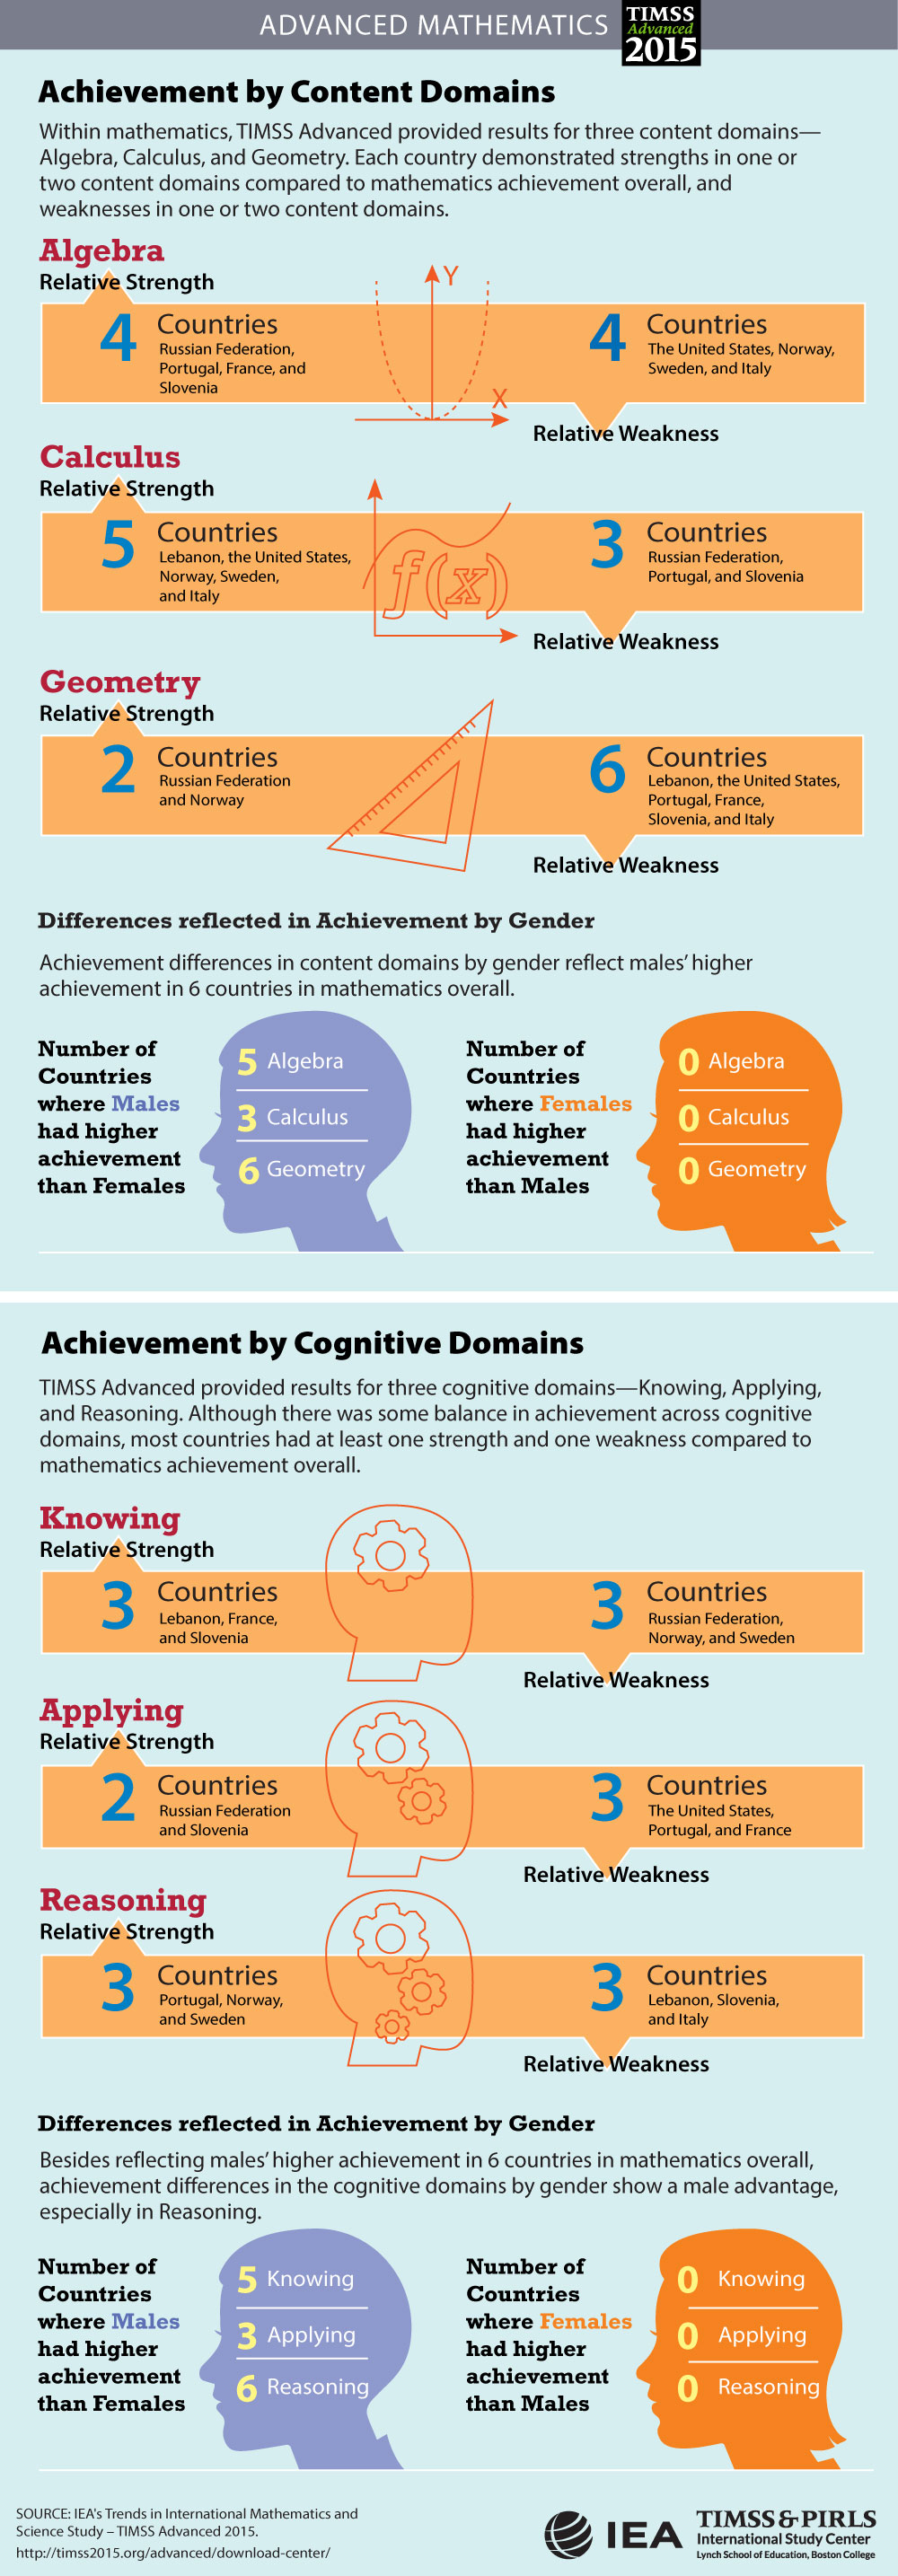 Achievement in Content and Cognitive Domains Infographic